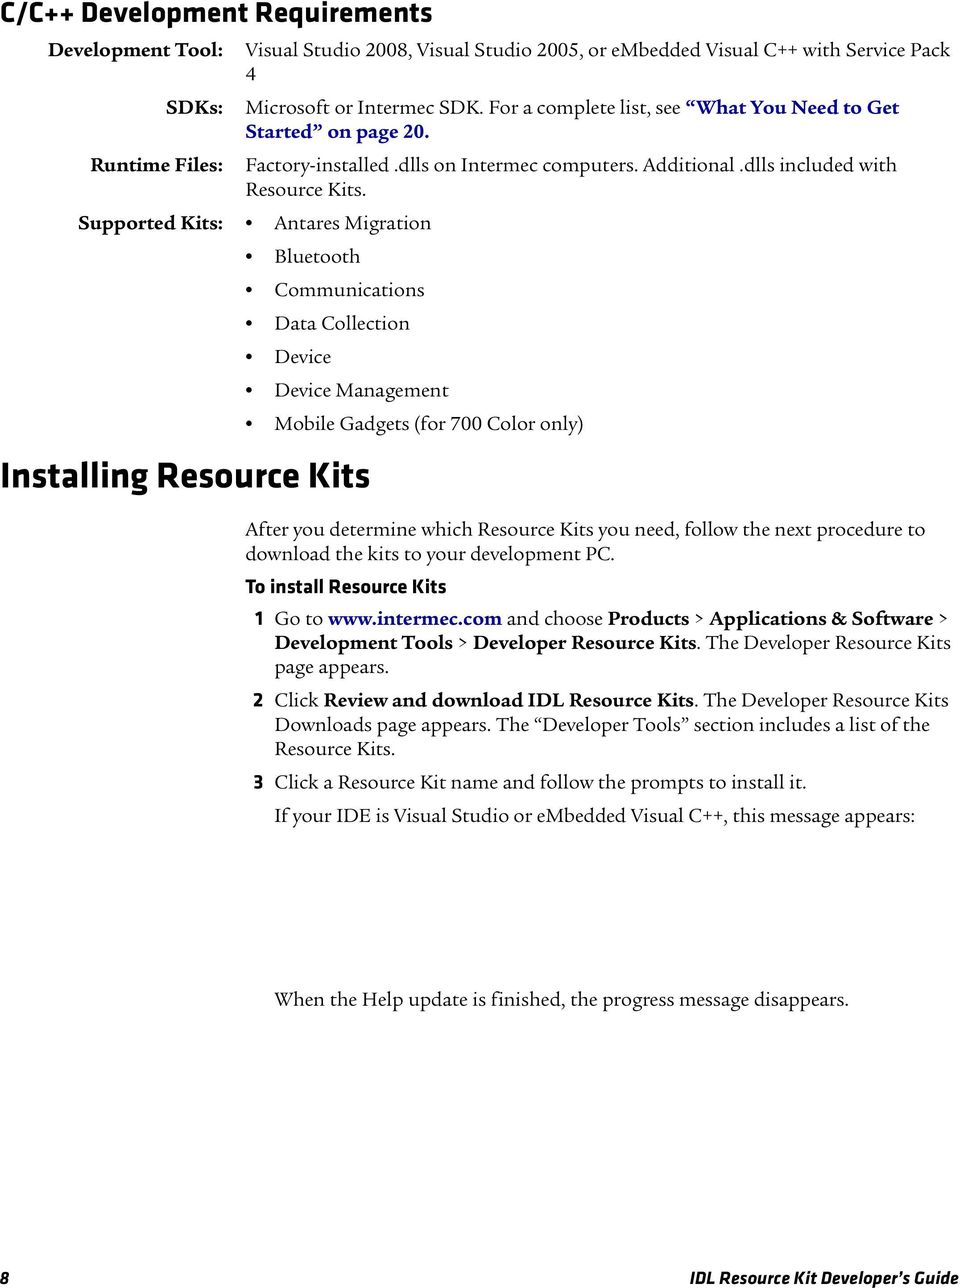 Supported Kits: Antares Migration Bluetooth Communications Data Collection Device Device Management Installing Resource Kits Mobile Gadgets (for 700 Color only) After you determine which Resource